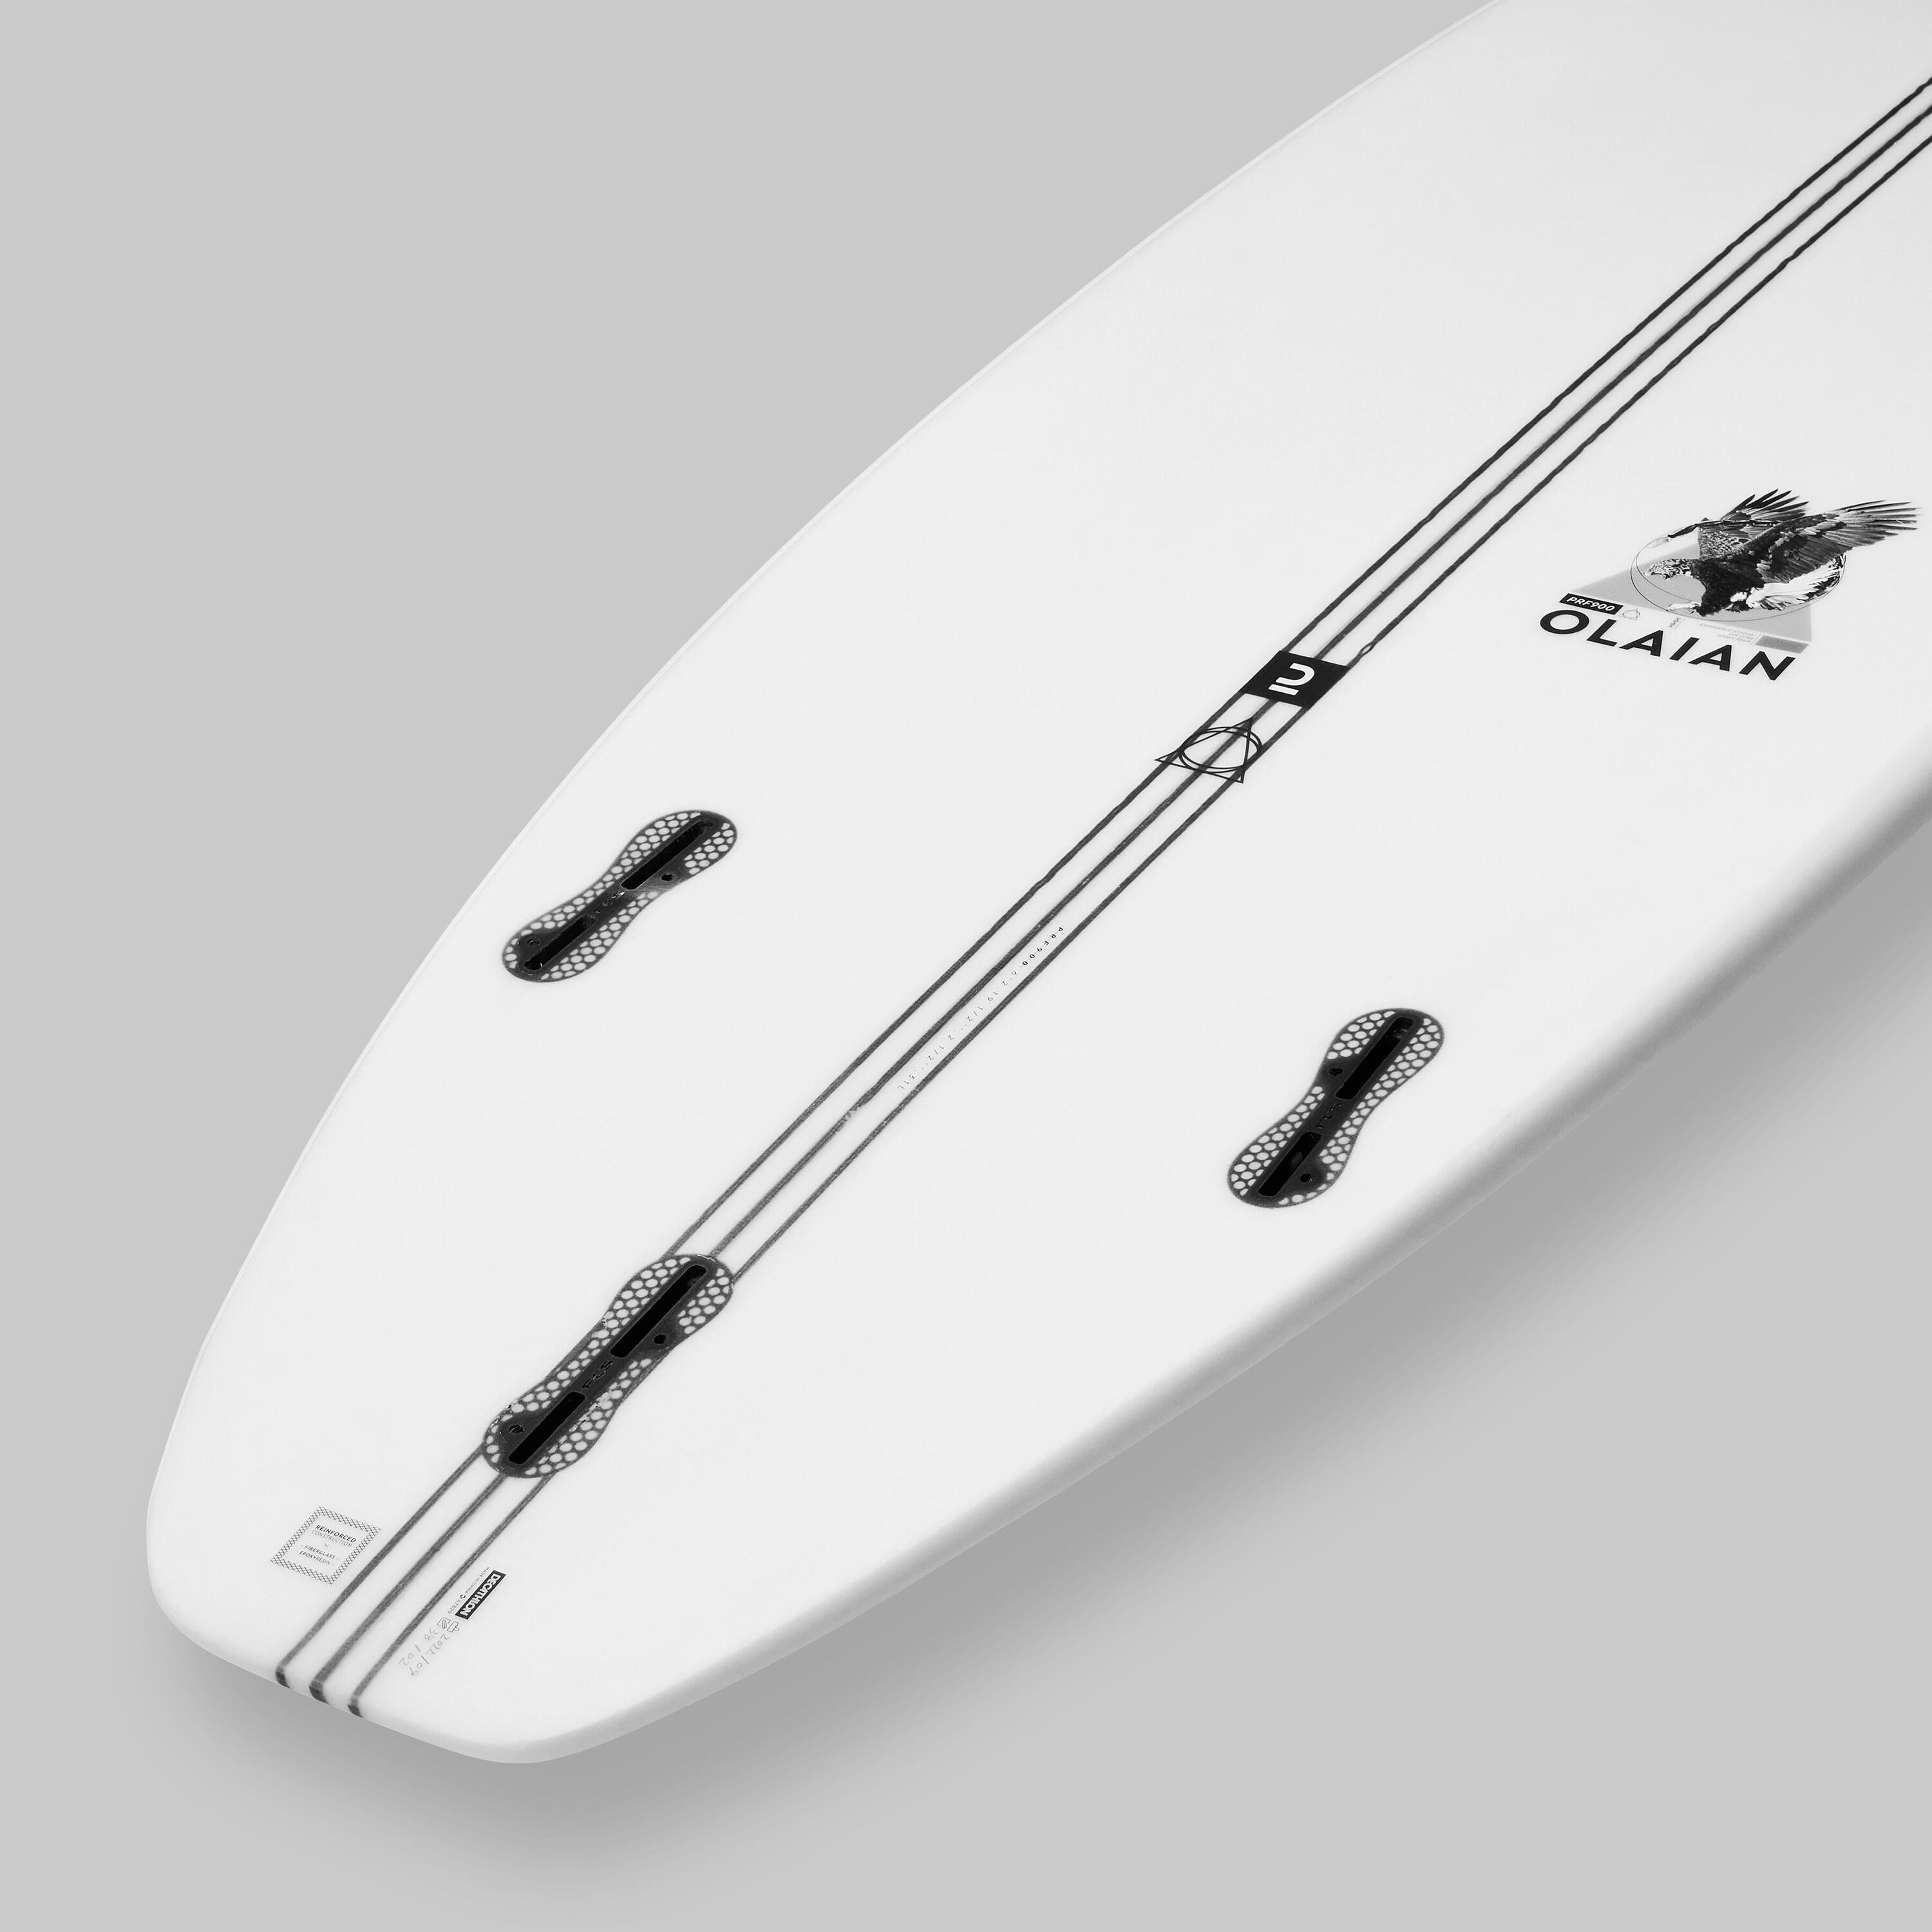 SHORTBOARD 900 PERF 6' 29 L. Supplied without fins 9/11